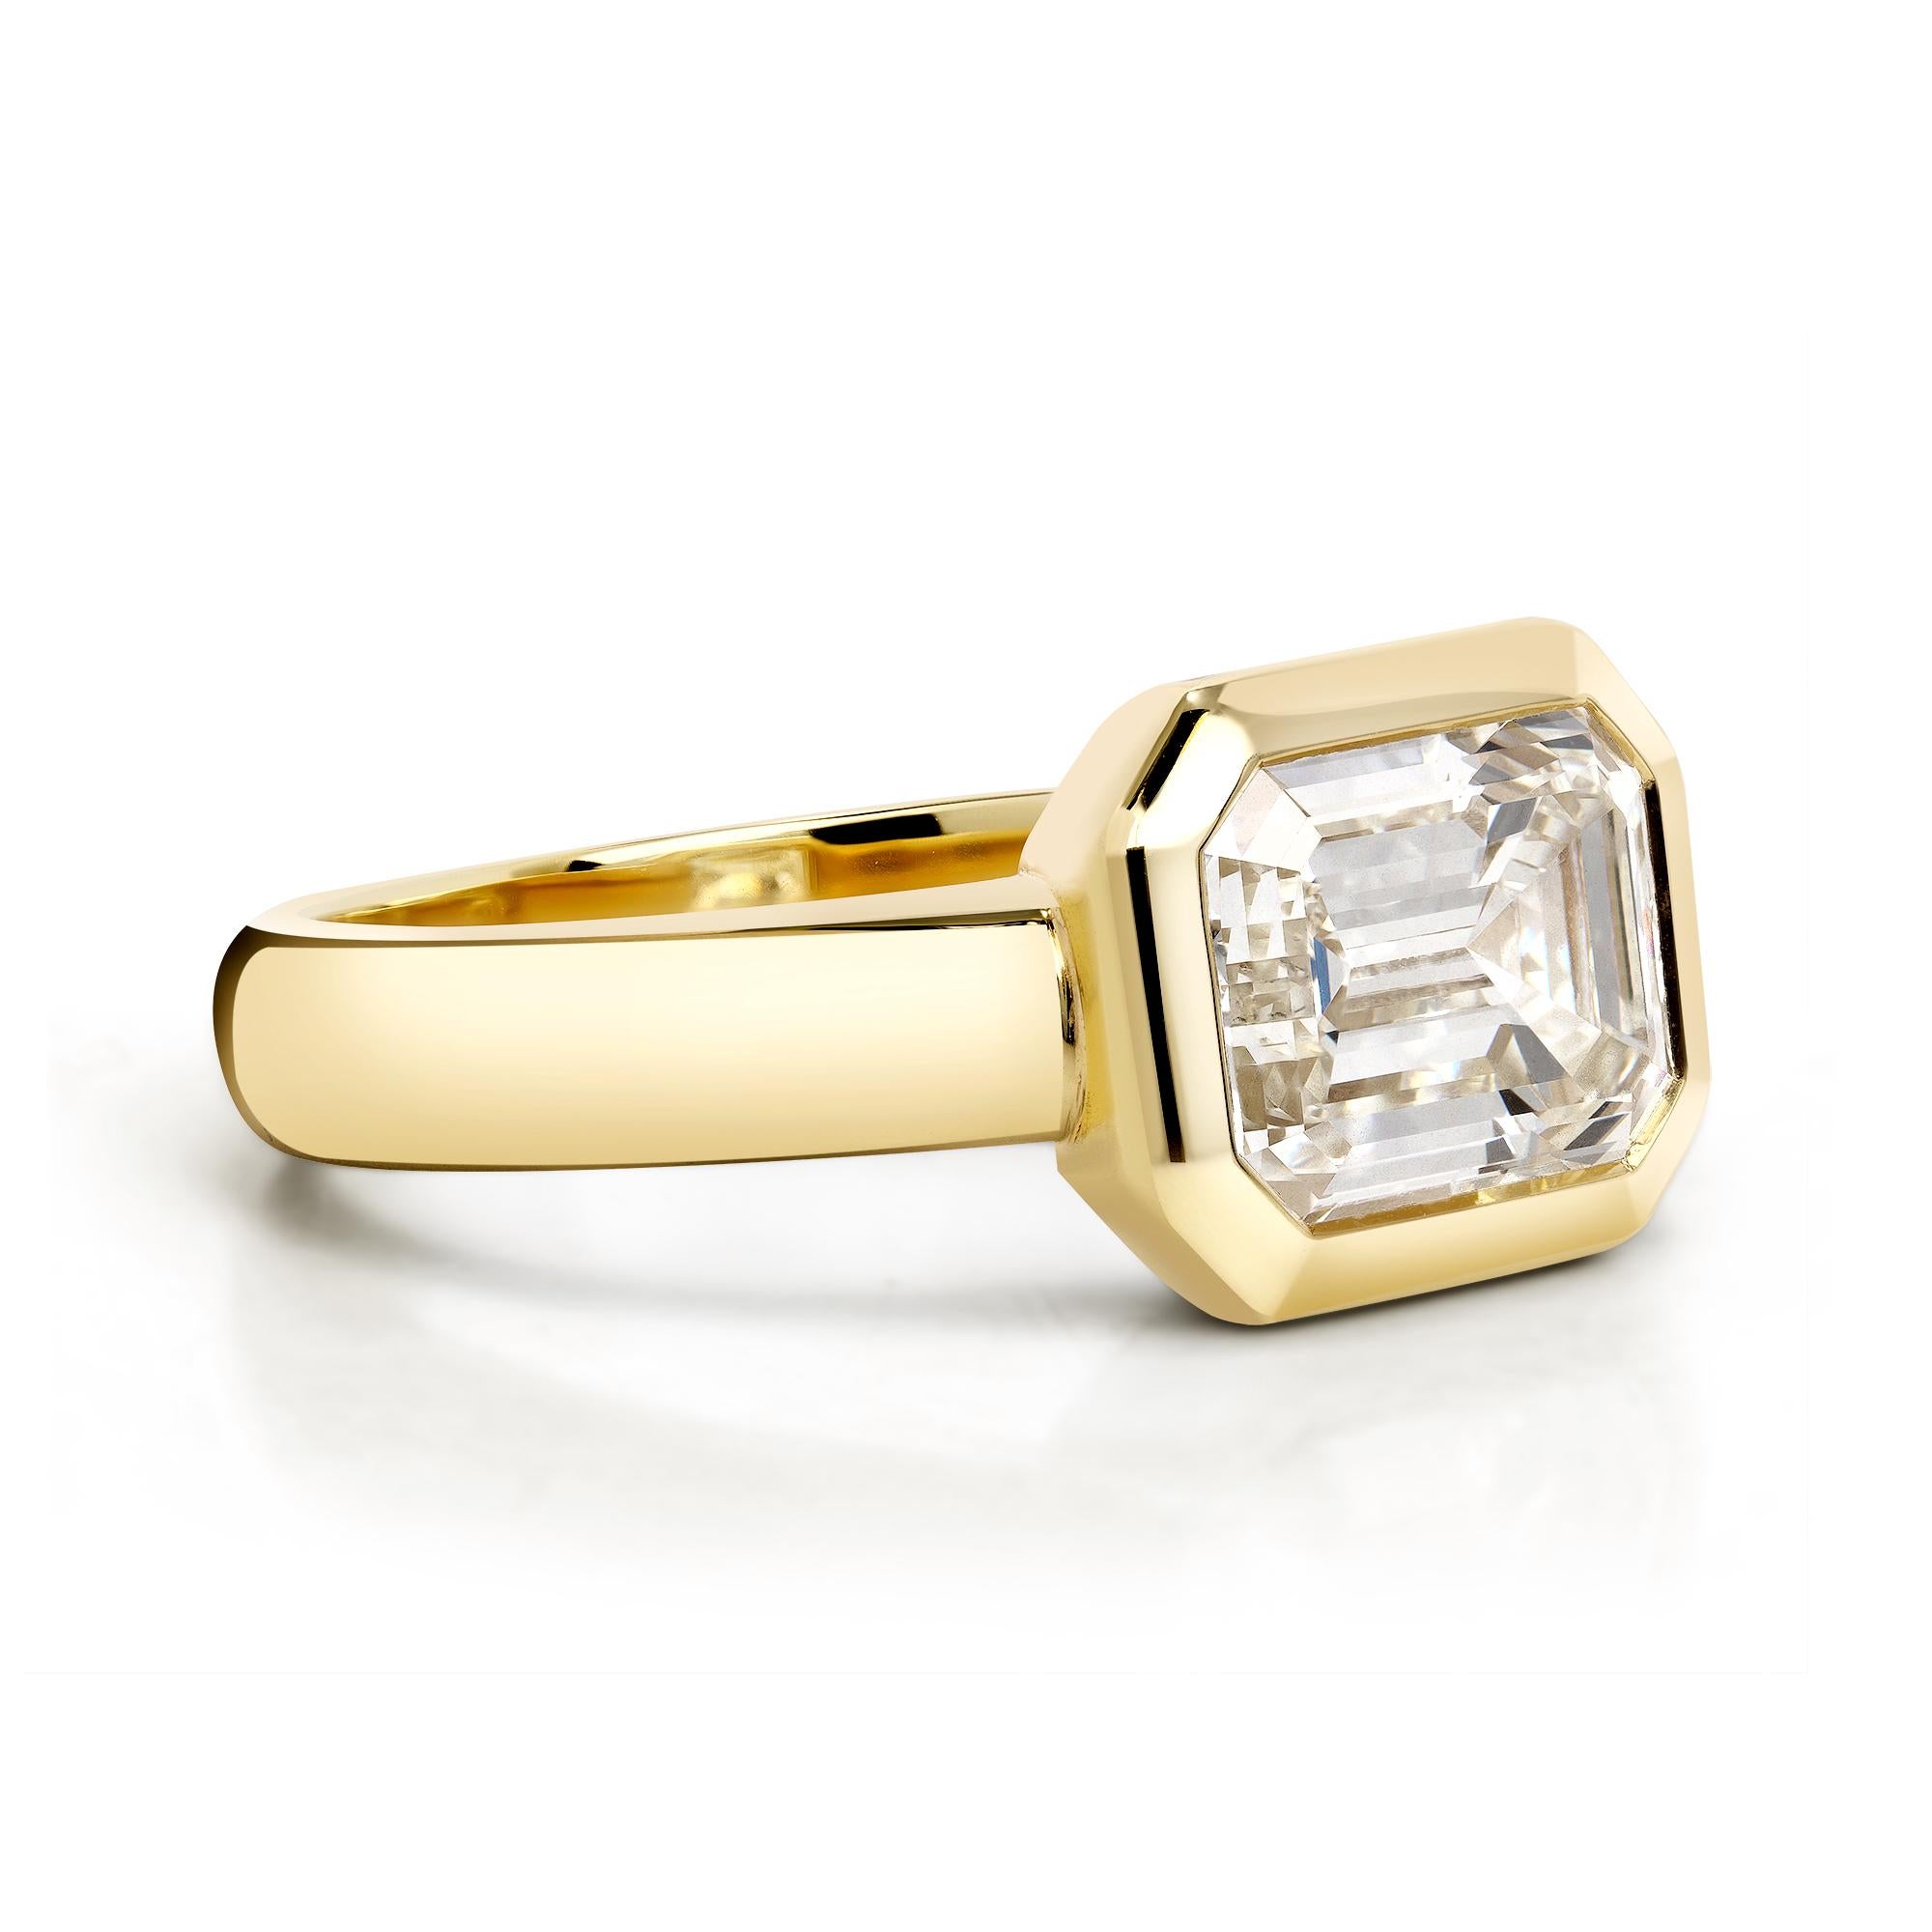 2.14ct L/VS1 GIA certified emerald cut diamond bezel set in a handcrafted 18K yellow gold mounting.